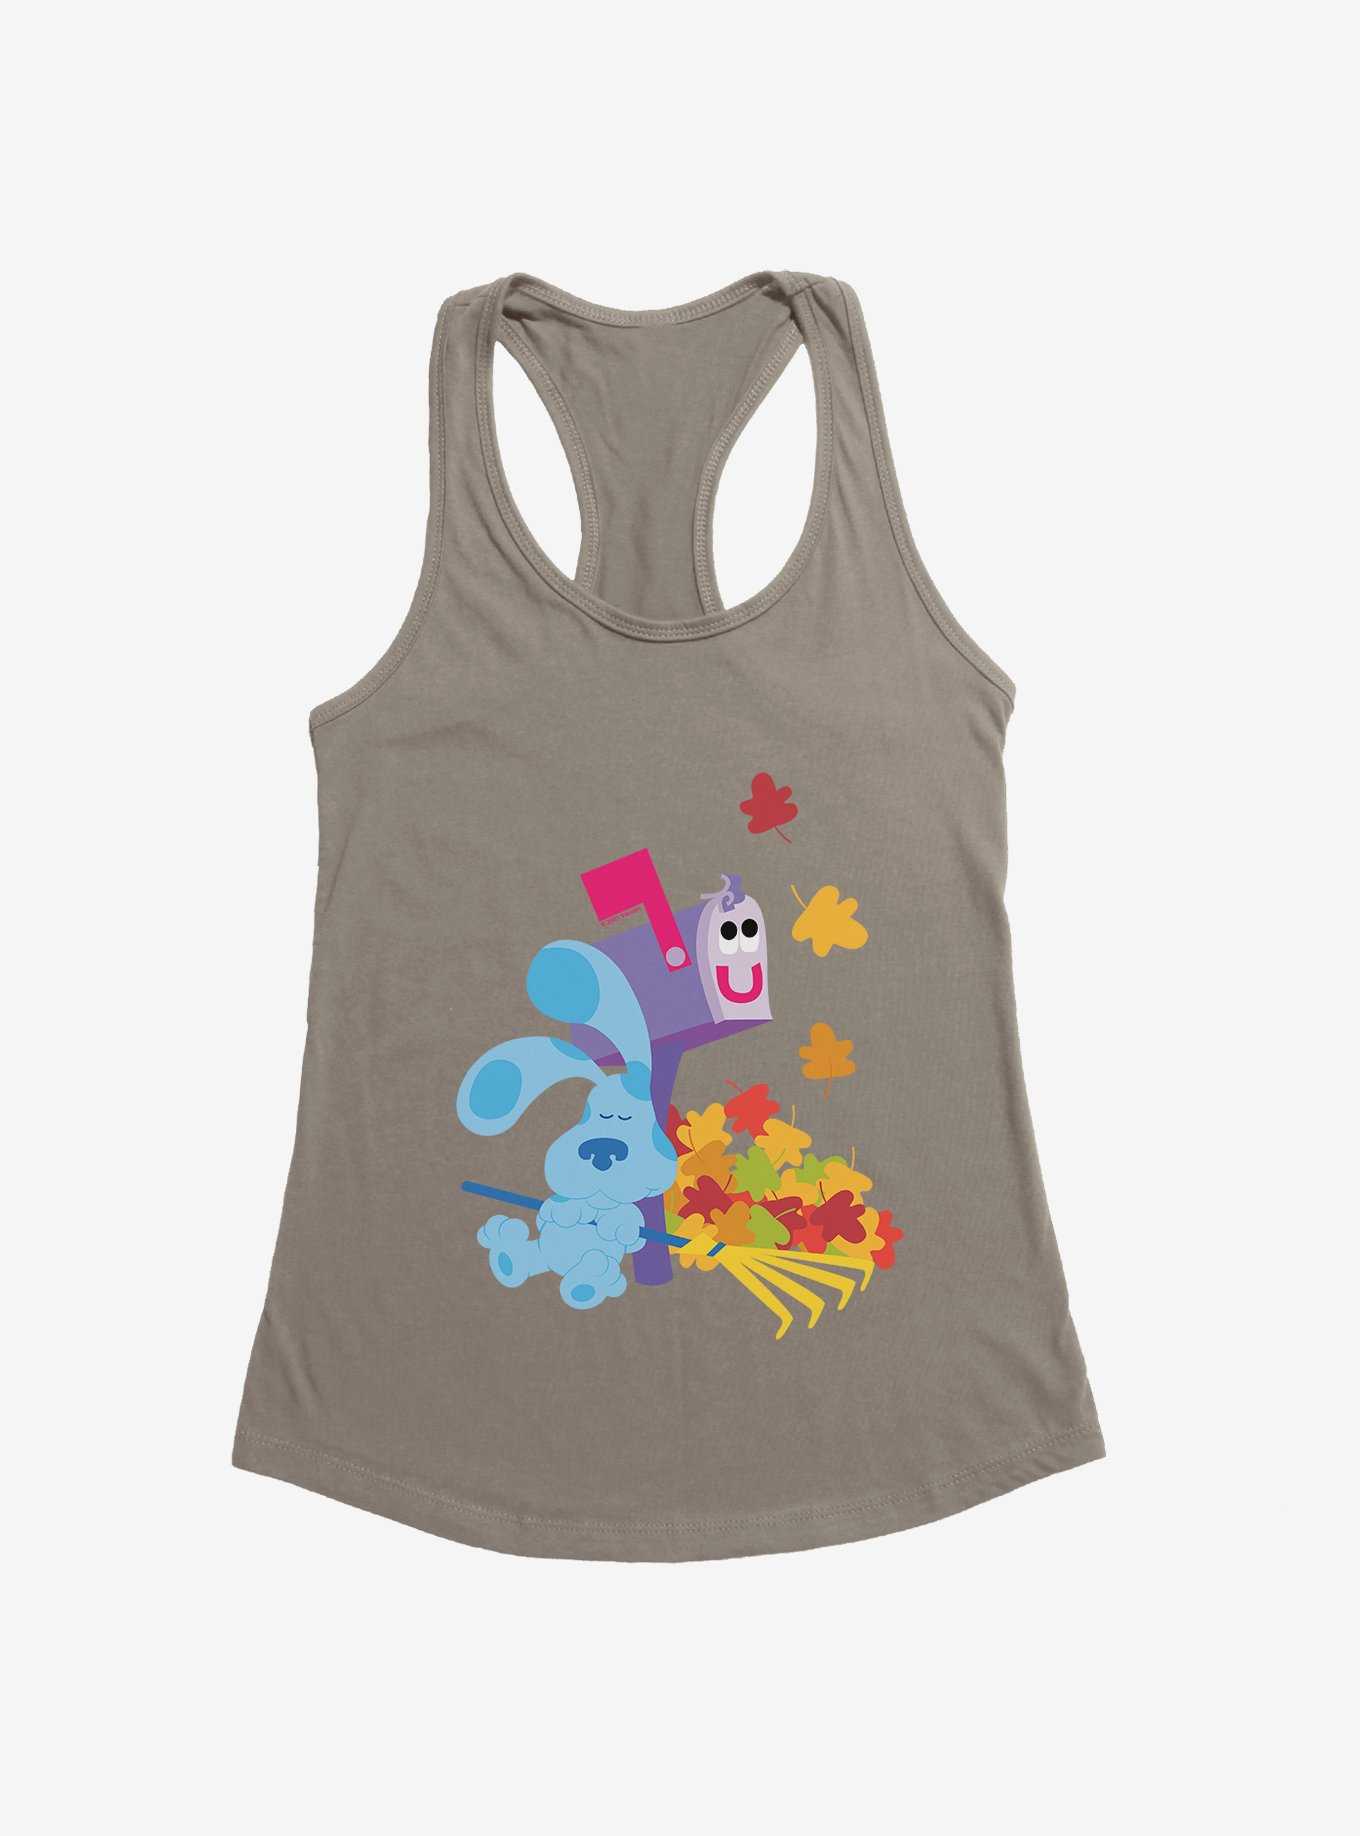 Blue's Clues Mailbox And Blue Autumn Leaves Girls Tank, , hi-res